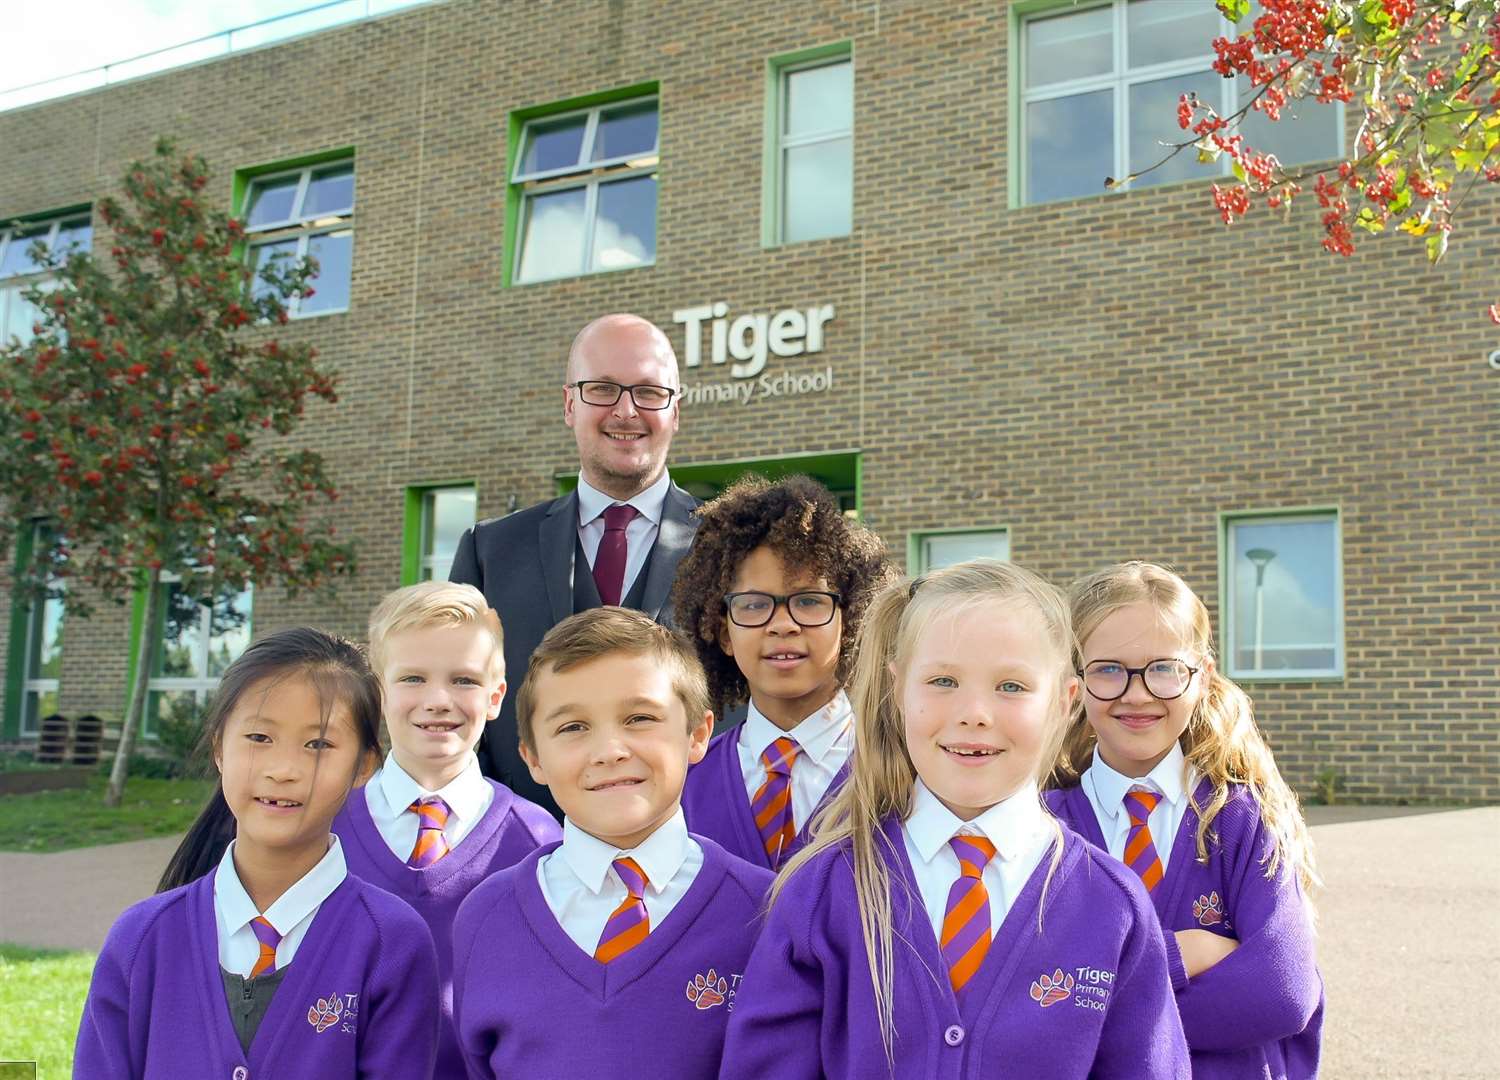 The school has turned its fortunes around since 2019